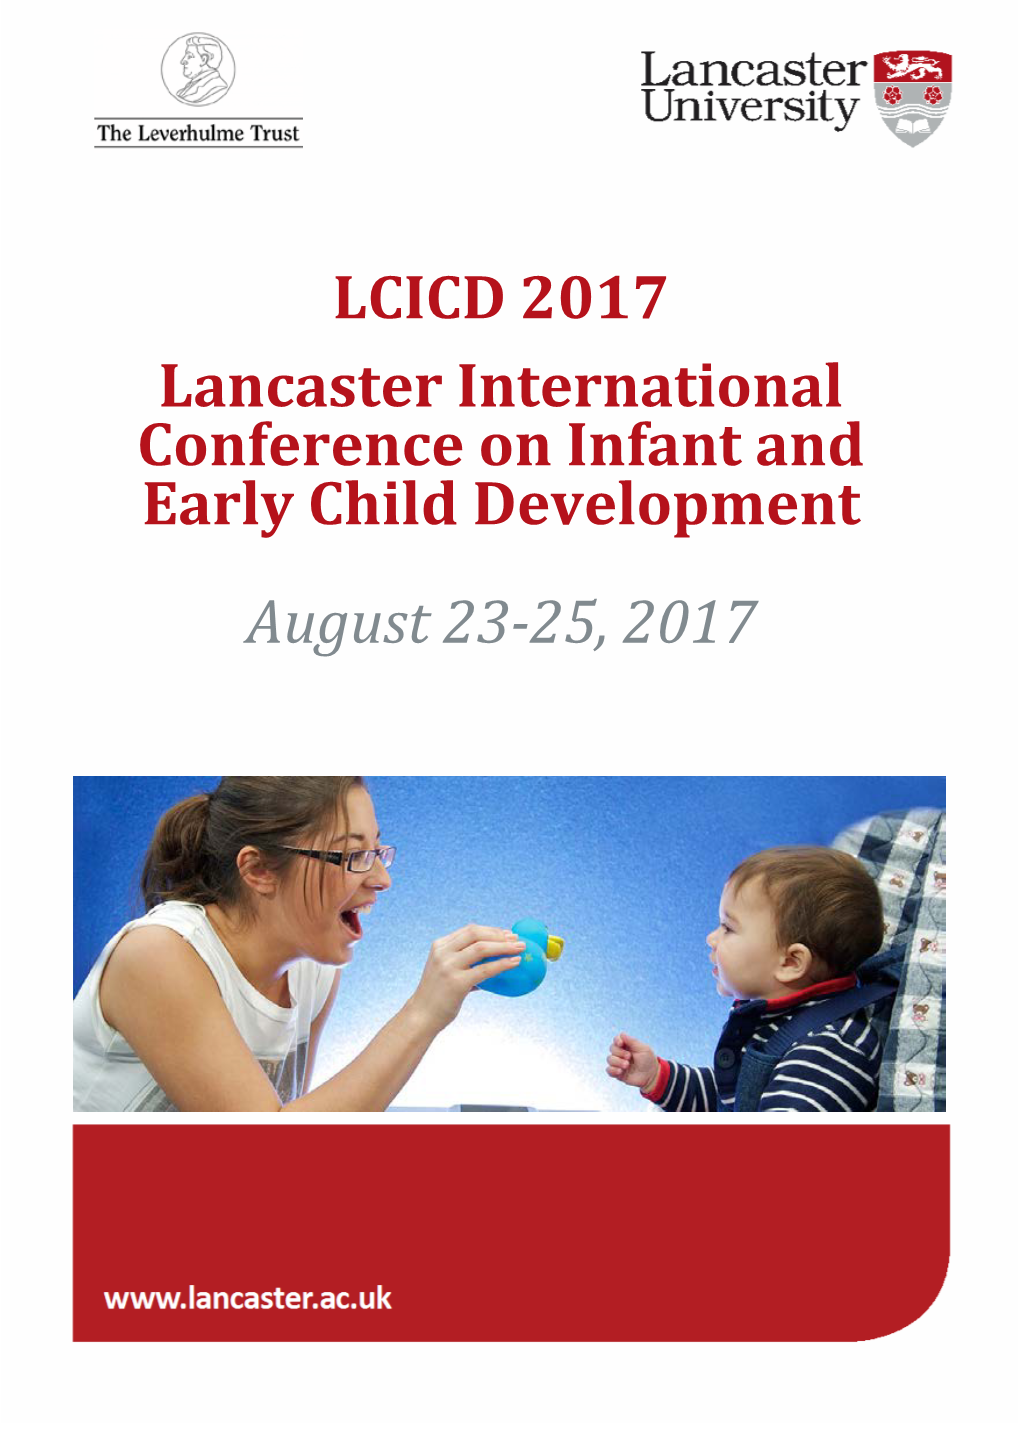 LCICD 2017 Lancaster International Conference on Infant and Early Child Development